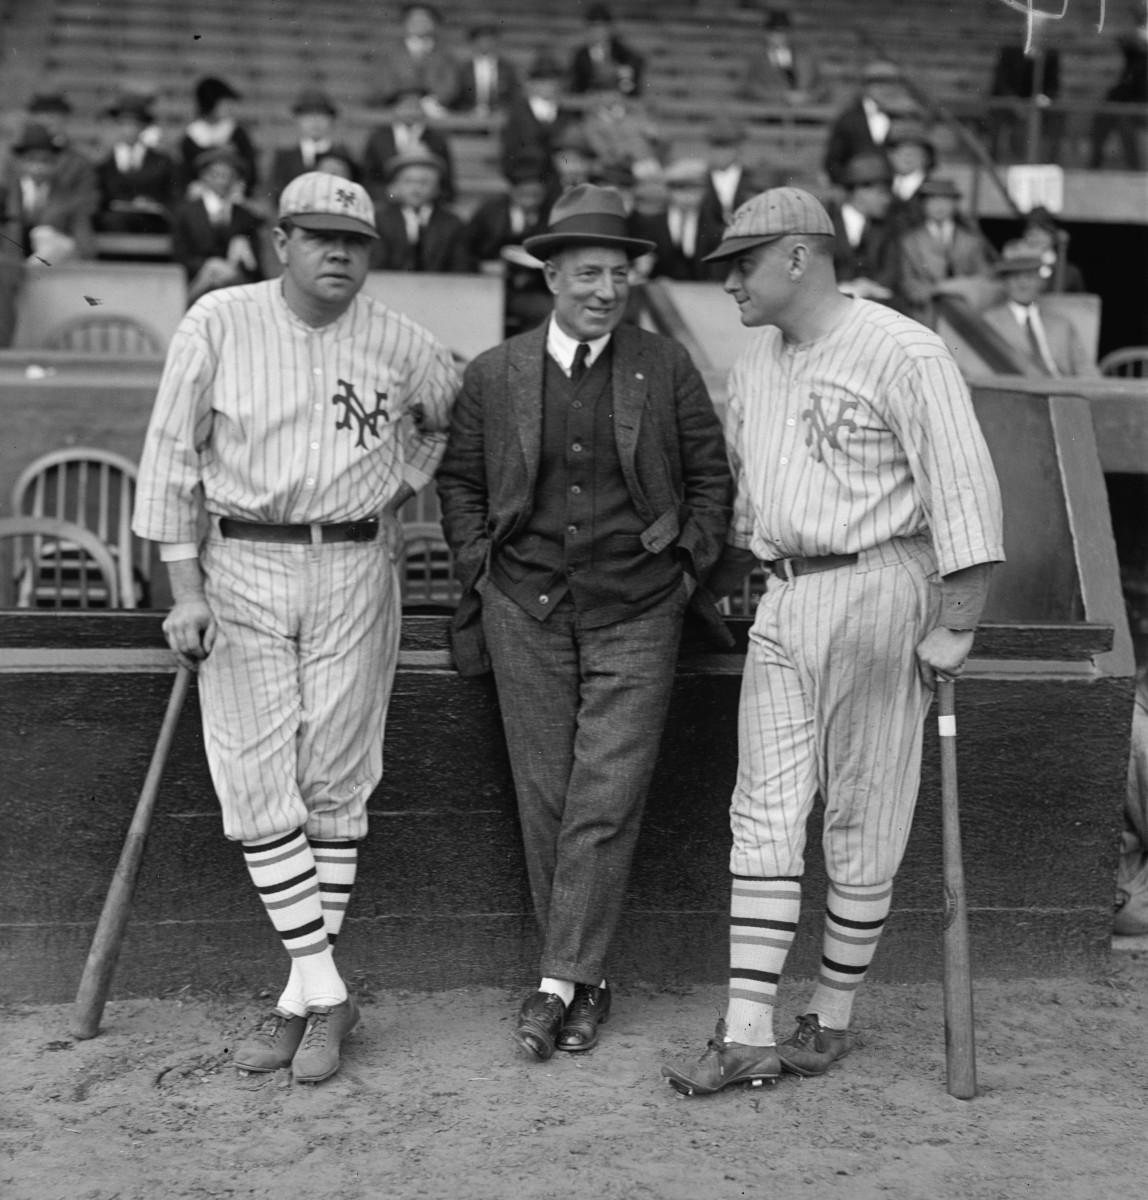 1923 Started the Yankees' World Series Dominance